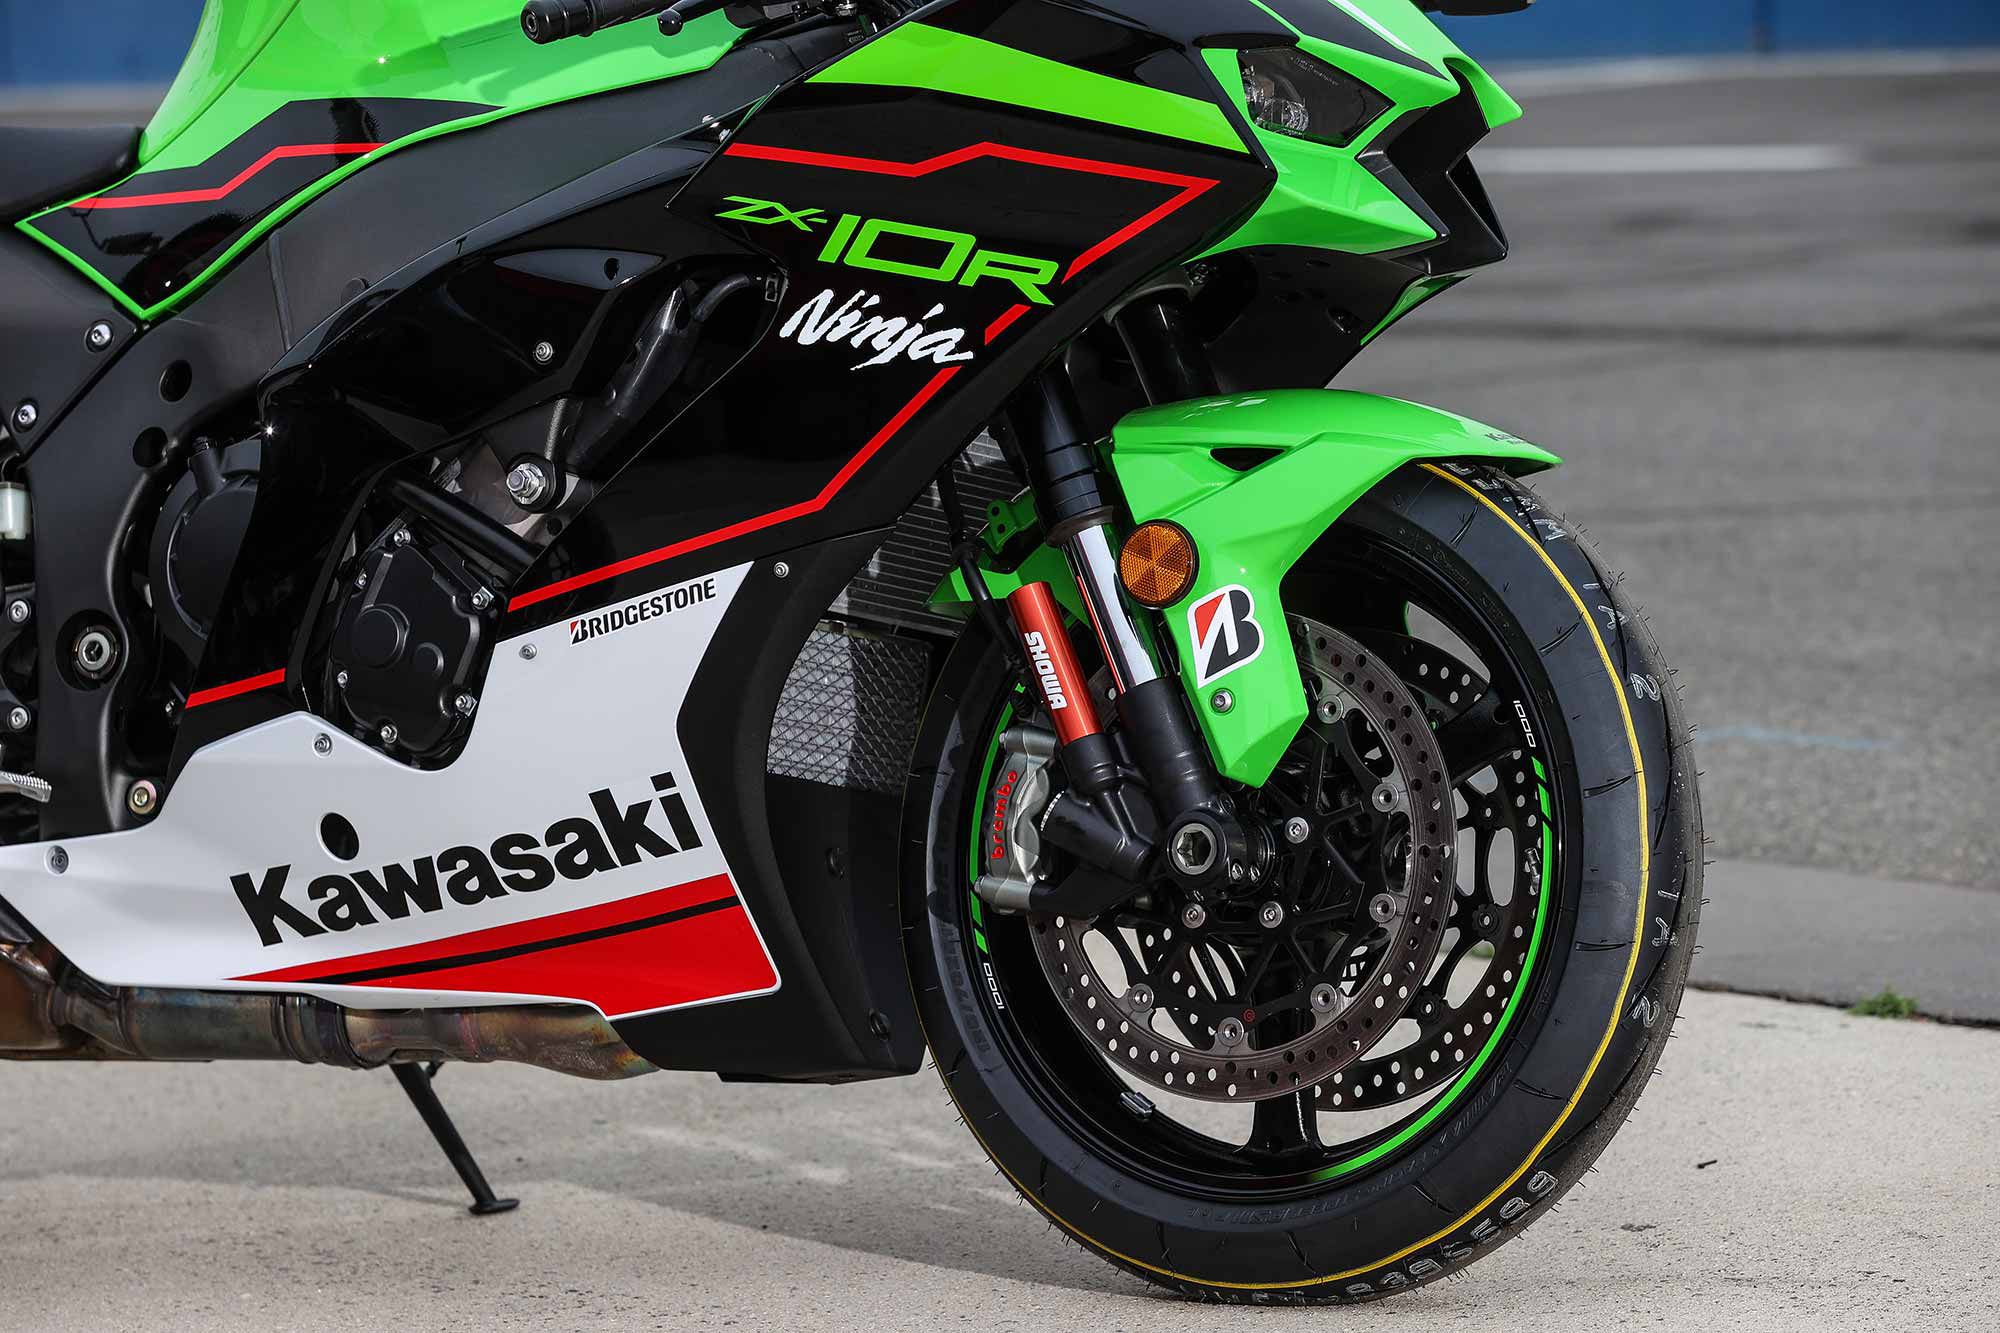 The ZX-10R’s Showa Balance Free Fork gets revised internal damping settings and a softer spring rate (21.0 N/mm from 21.5 N/mm). The result is an increased feel at the contact patch, especially noticeable at midcorner.